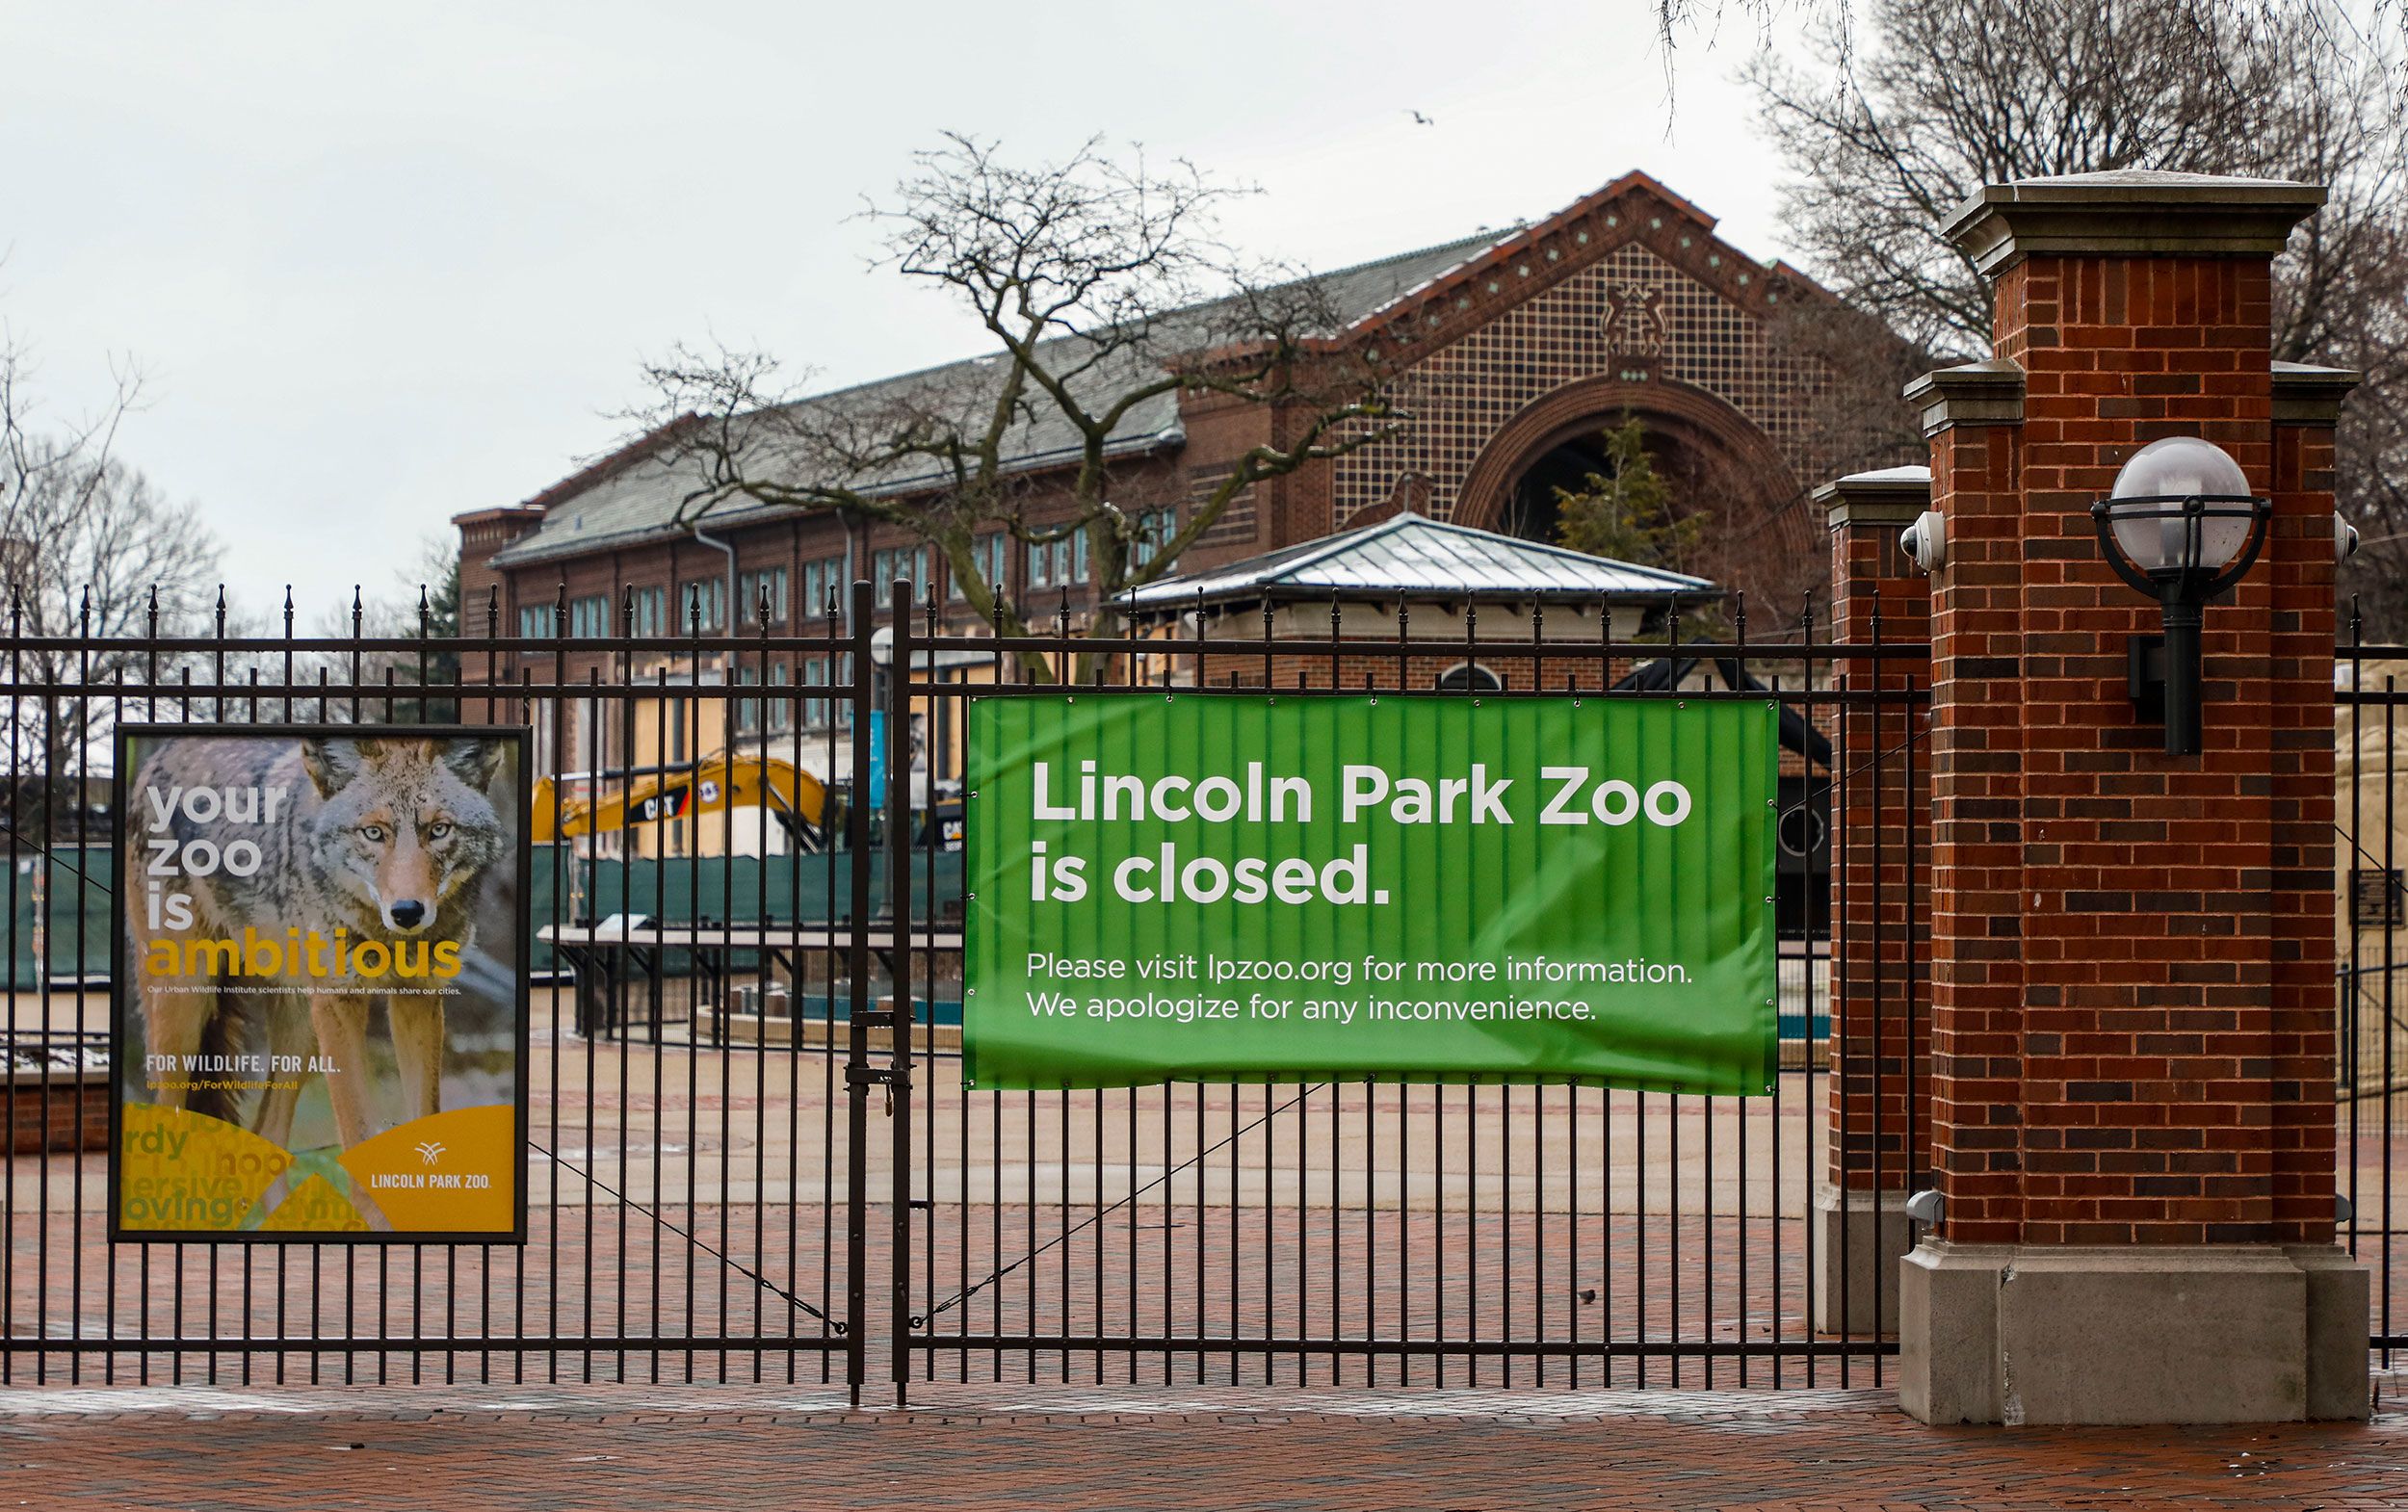 Lincoln Park Zoo to Remain Free Through at Least 2050